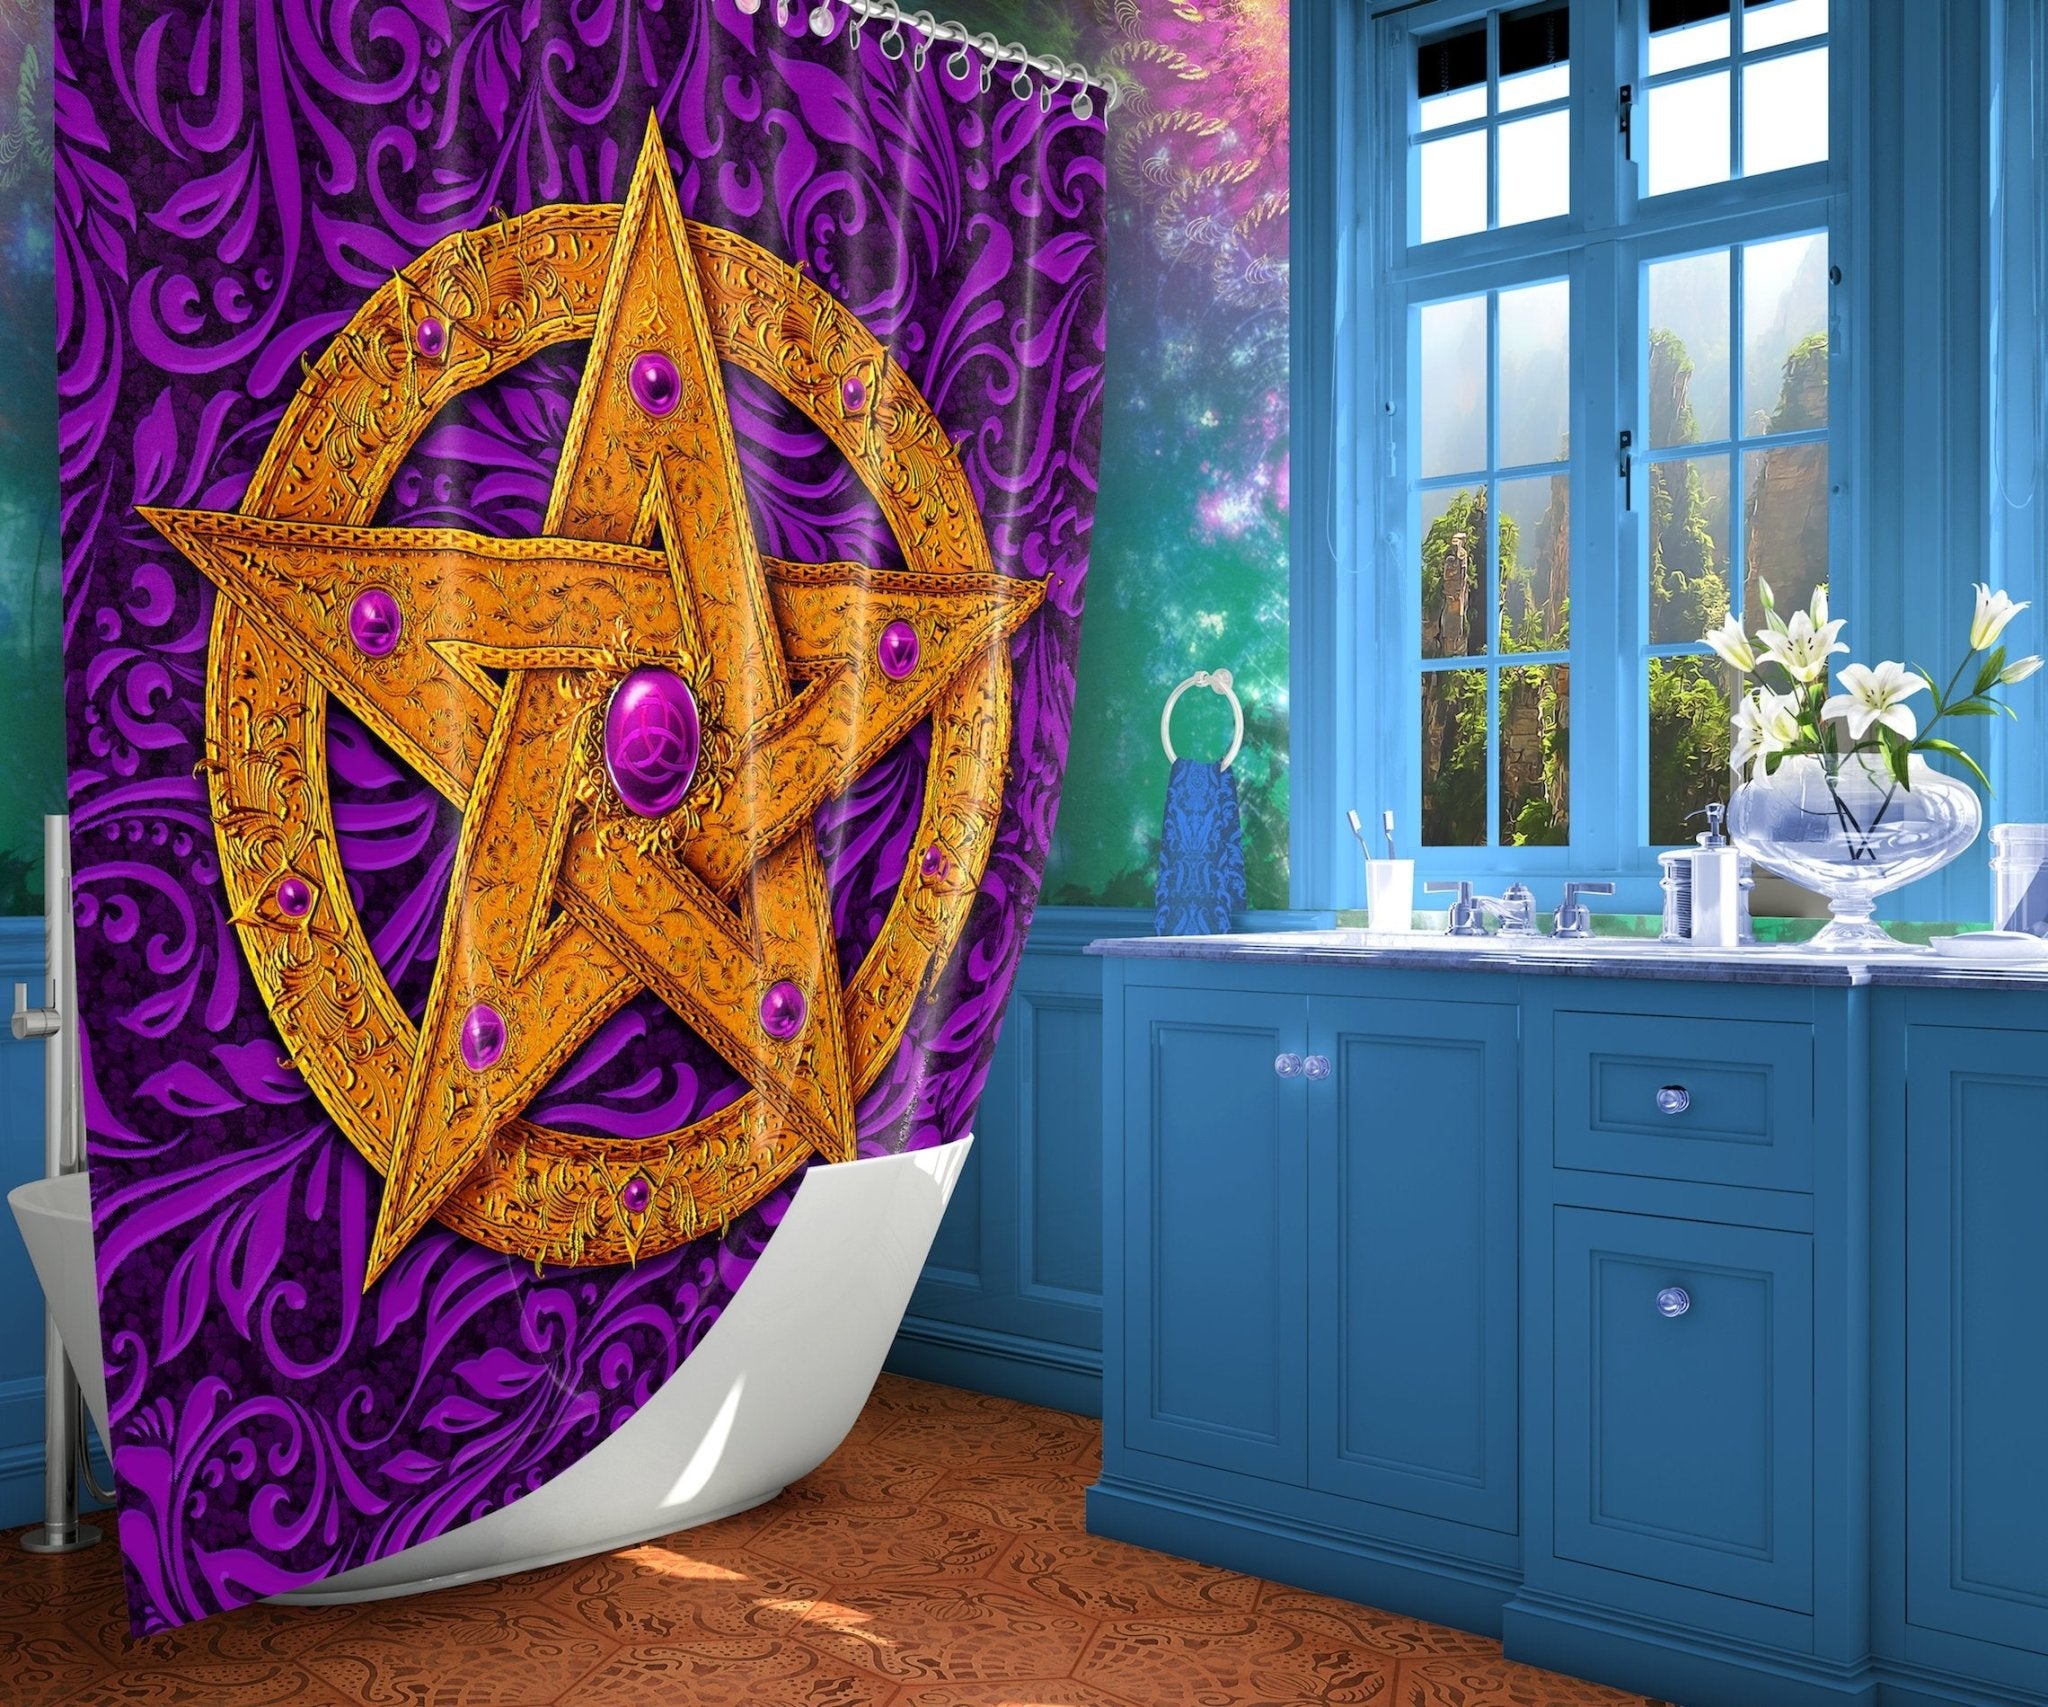 Pentacle Shower Curtain, Witch Bathroom Decor, Wicca Art, Eclectic and Funky Home - Gold Star, 4 Colours - Abysm Internal